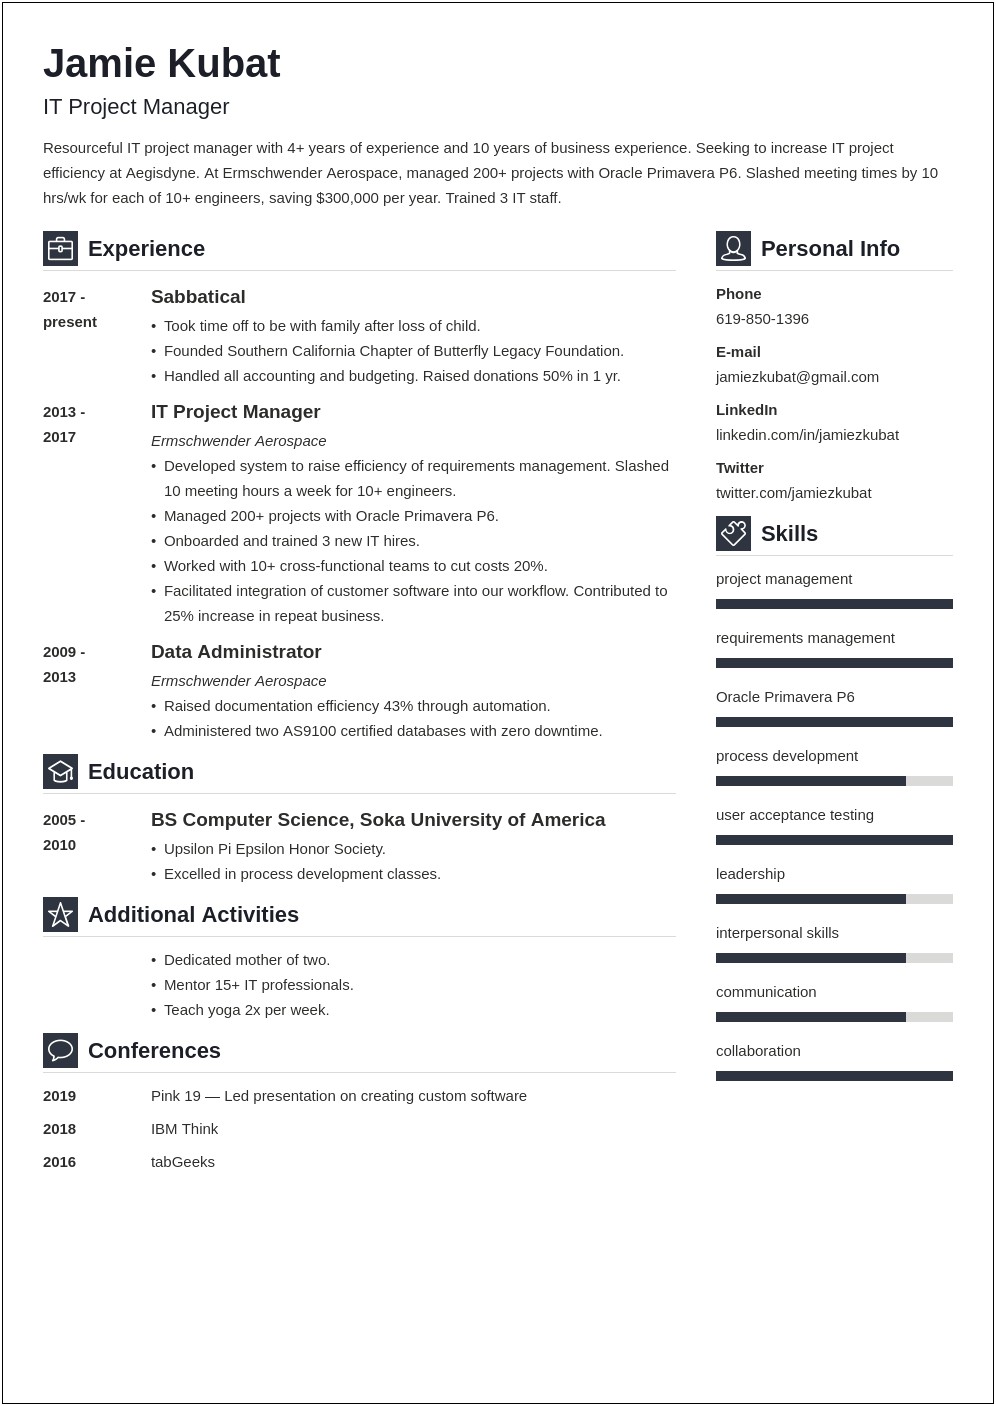 Best Resume To Use With Gaps In Employment